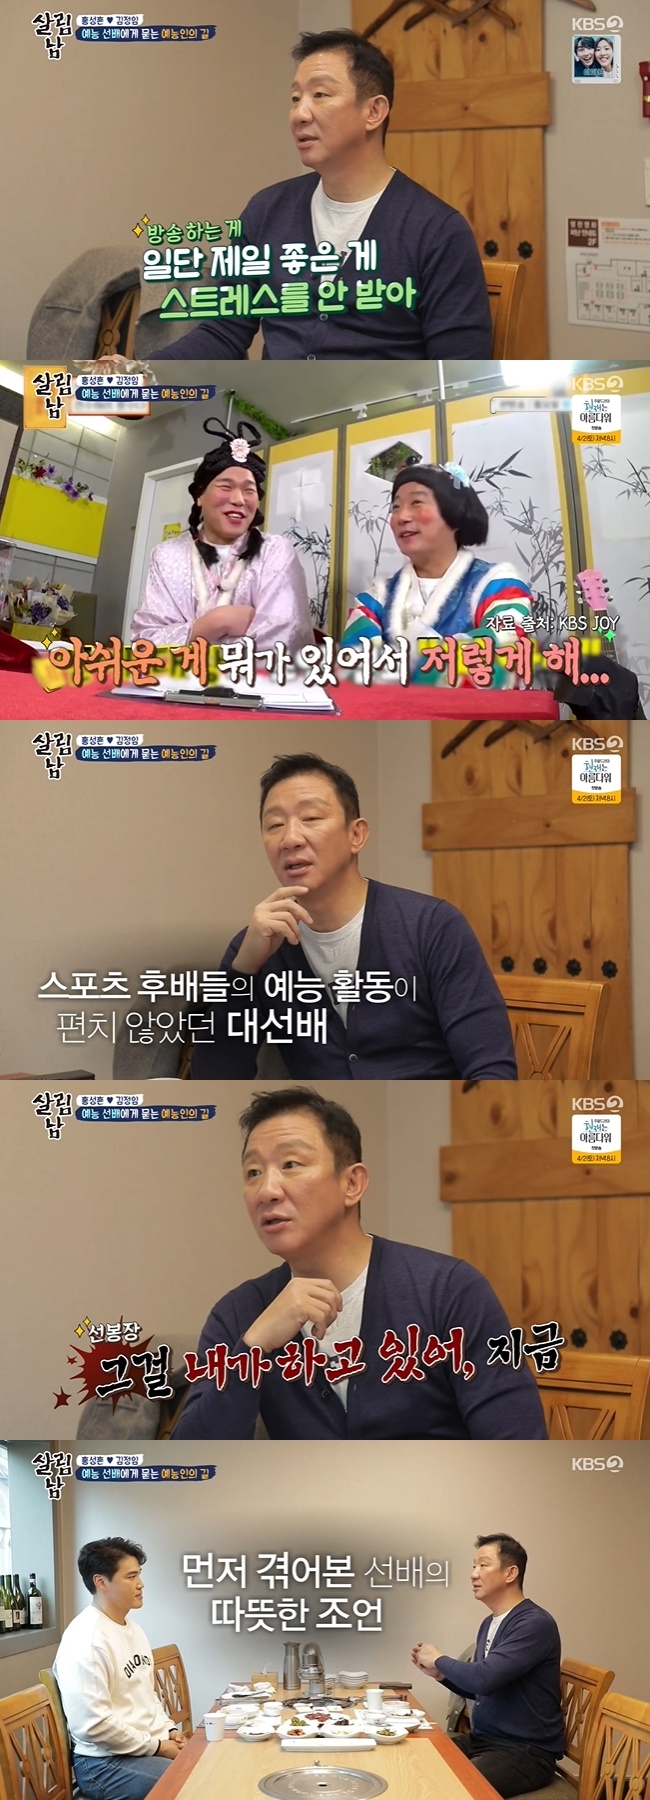 Hur Jae advised Hong Sung-heon as an entertainer from the same player.On KBS 2TVs Season 2 of Living Men, which was broadcast on March 26, Hong Sung-heon met with Hur Jae.The two men, who formed a consensus on menopausal and family stories, talked about the appearance of entertainment.Hur Jae, who currently has only three fixed-star entertainment programs, explained the advantages of entertainment, saying, The best is not stressful.Hong Sung-heonn said, I am attracted to performing arts.I have to go back to the Nippon Professional Baseball scene, but now it seems to be hanging in the middle of the Nippon Professional Baseball, the entertainer.I thought youd been a director, he said.Hur Jae sympathized with Hong Sung-heons troubles and said, For example, when I saw Seo Jang-hoon, I thought, He has something to do with it.He said, Why eat so much? He said, I thought I should broadcast like that, but I am doing it. He laughed.Im old and Ive been in charge, so theres no line of Go to basketball, or do entertainment. The sex marks are good at many things.I think it would be better to do my best to increase the number of performing arts now.If you need a sex mark, youll be asked someday, and you can make it work.You have a comfortable and warm character anyway, and I honestly come out and dance, and its raining, said Hong Sung-heonn, who was worried, and the bottom was revealed as an entertainer.Hur Jae said, Upgrade the dance. If the rain crawls, you can go down on your knees.The advantage of those who have worked in the group is to get on the mood well. 